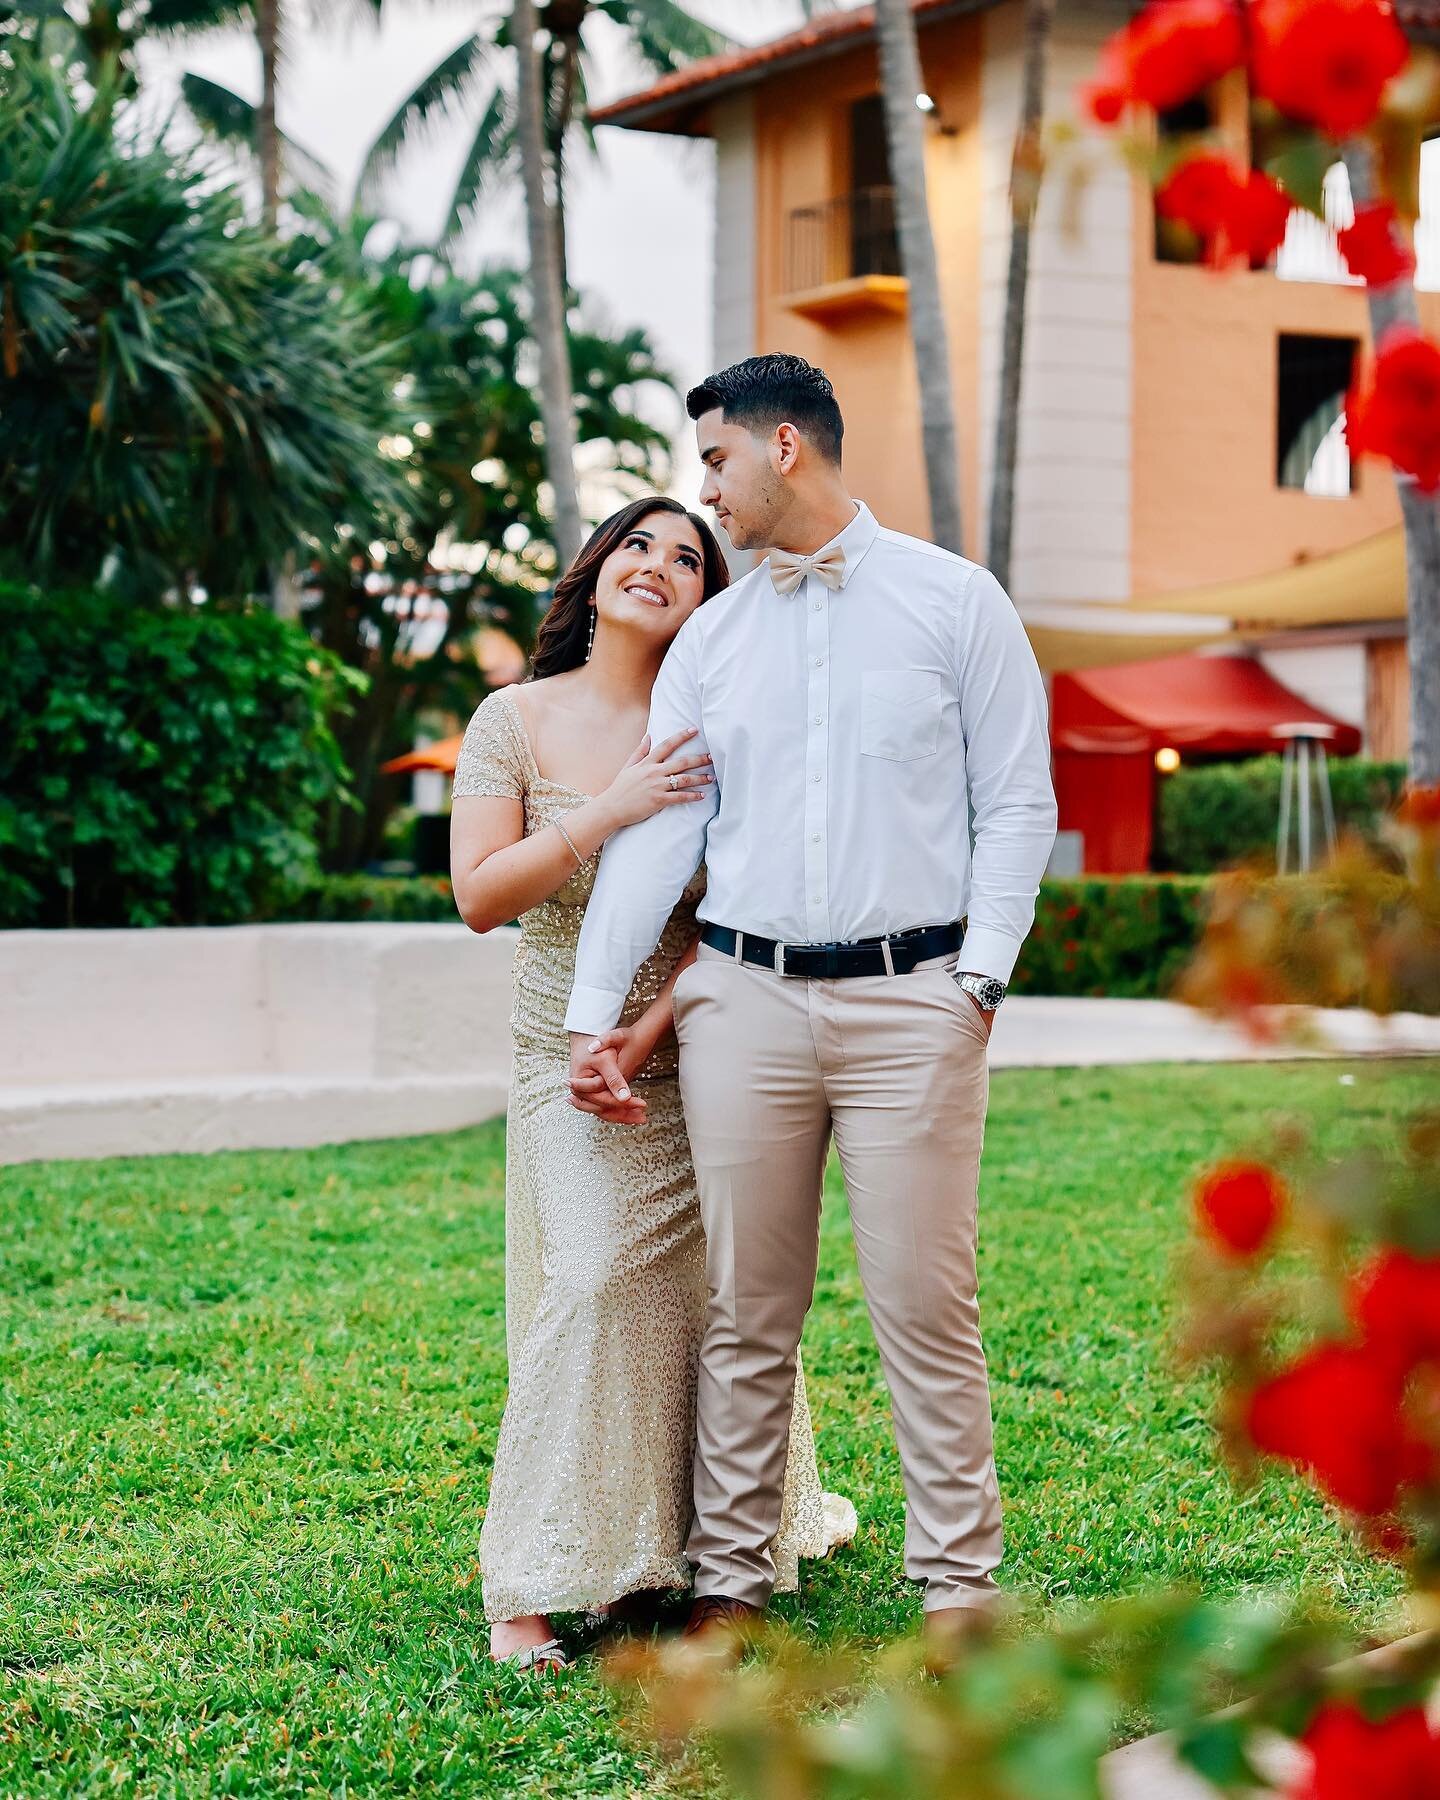 Lizbeth and Leonardo will be getting married next month in @villatoscanamiami 🌺
.
.
#miamiweddingphotographer #miamiwedding 
#miamidestinationwedding #miamiphotographer #miamiindianweddings #indianweddings #indianweddingphotographer #losangelesweddi